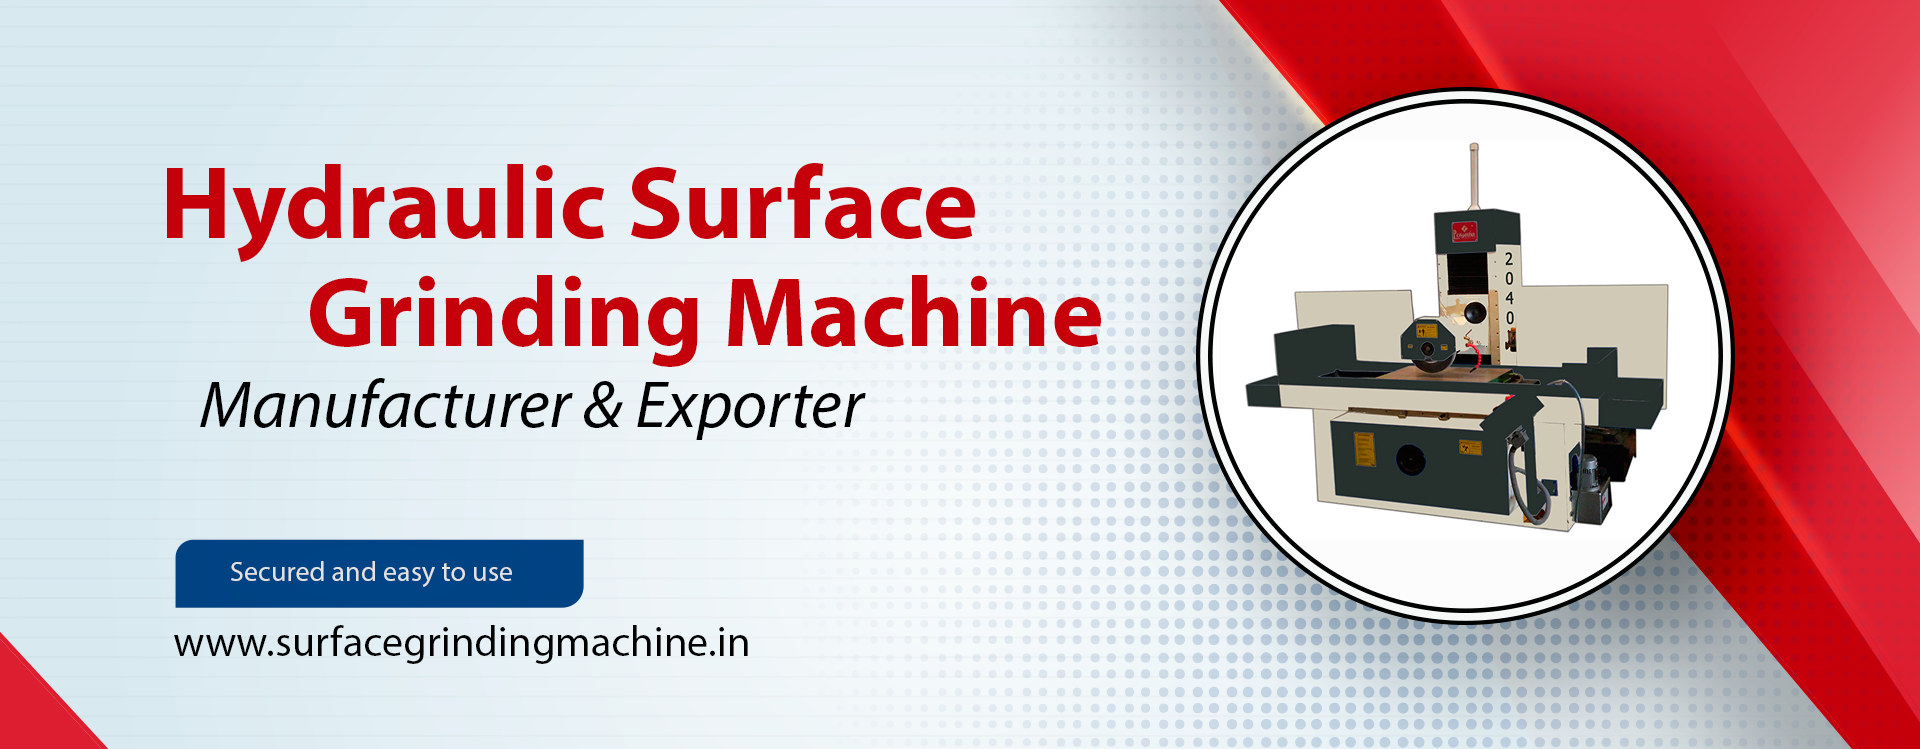 hydraulic Surface Grinding Machine exporter in India.